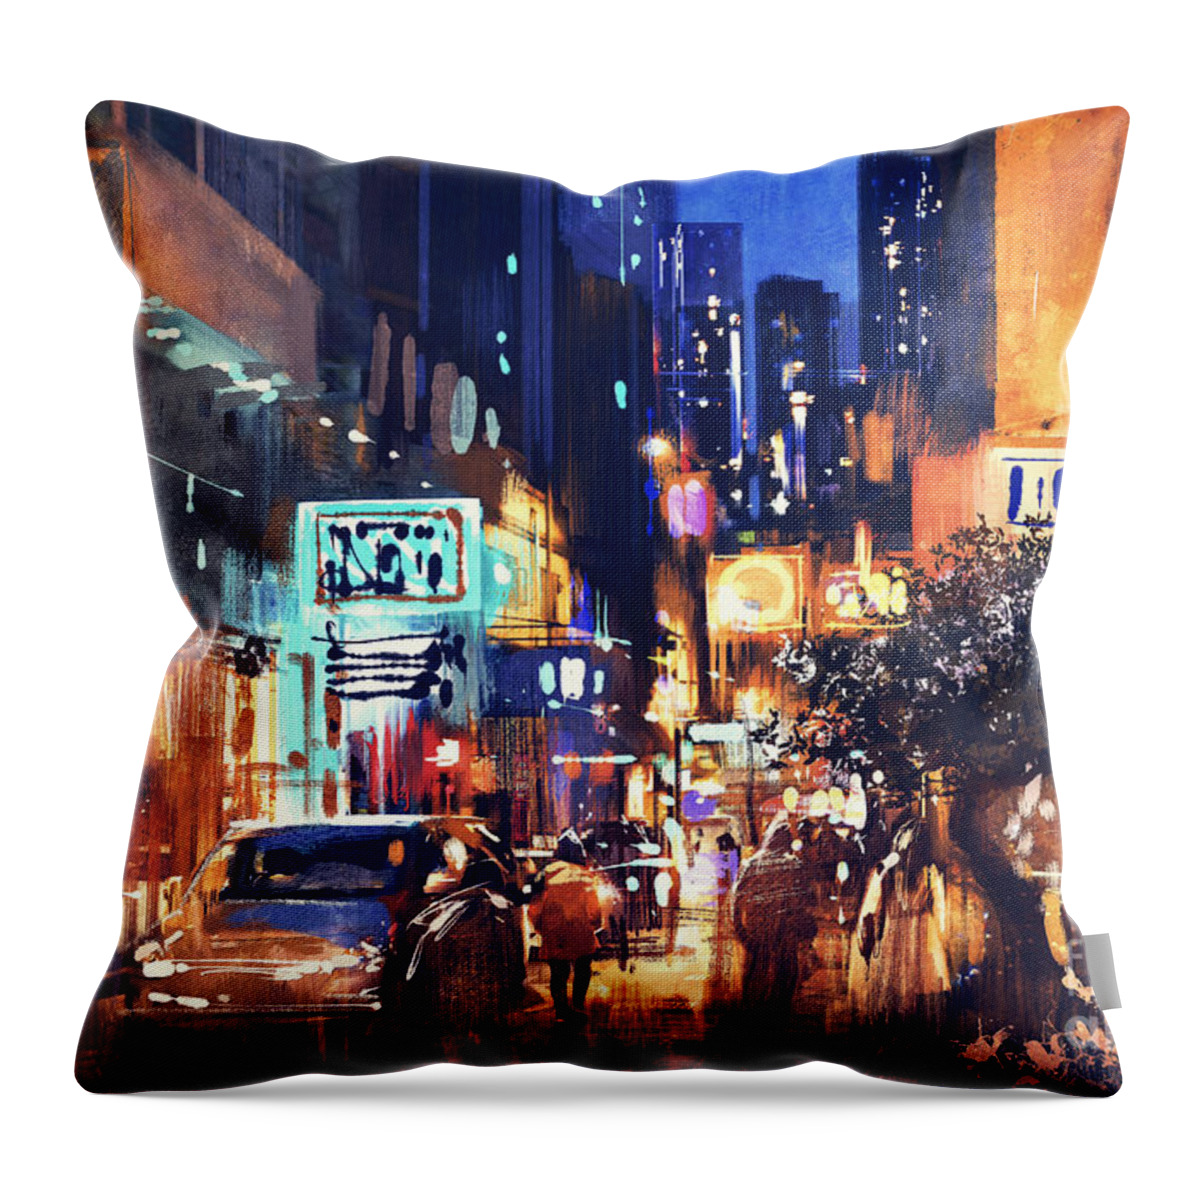 Abstract Throw Pillow featuring the painting Colorful Night Street by Tithi Luadthong